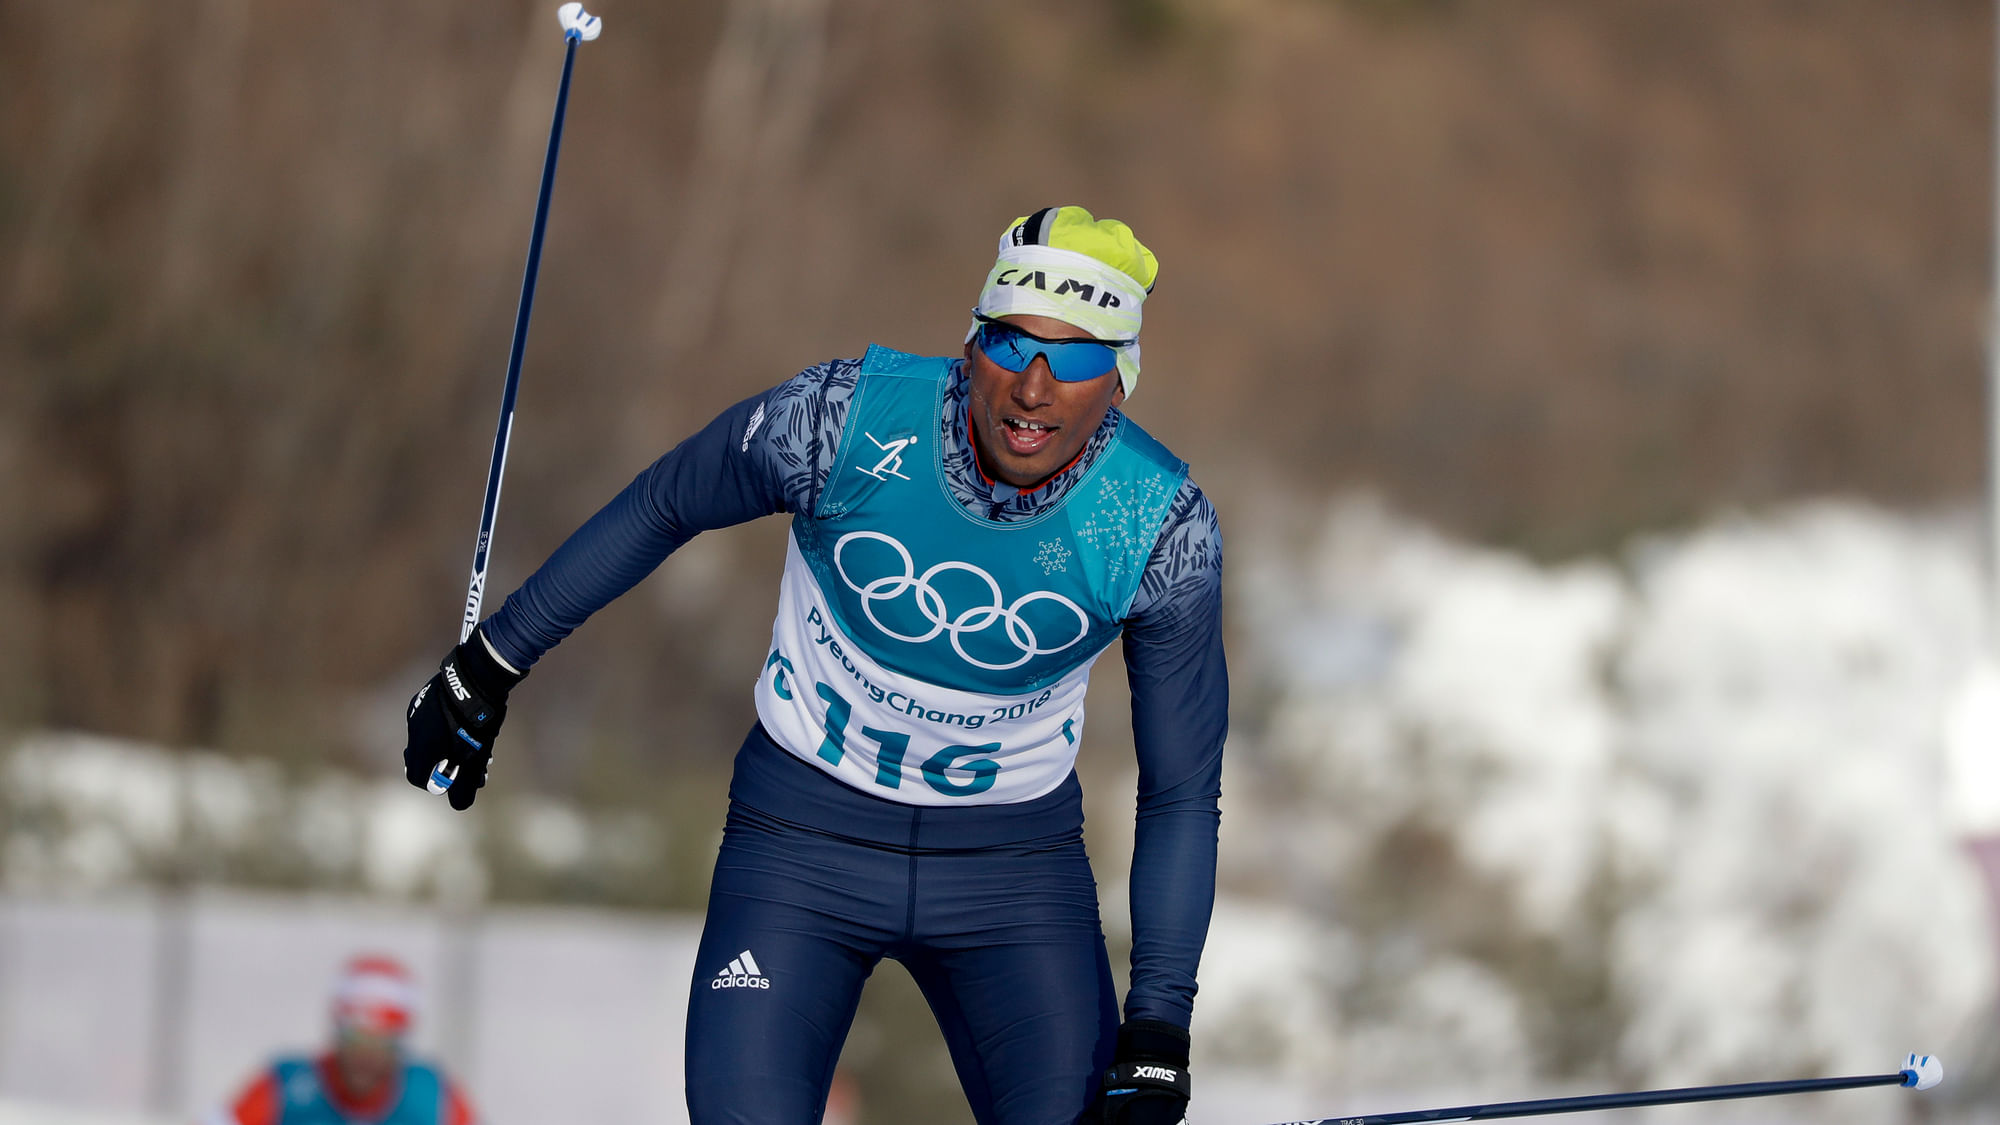 Jagdish Singh finished a dismal 103rd in the men’s 15-km free cross-country race at his debut Winter Olympics.